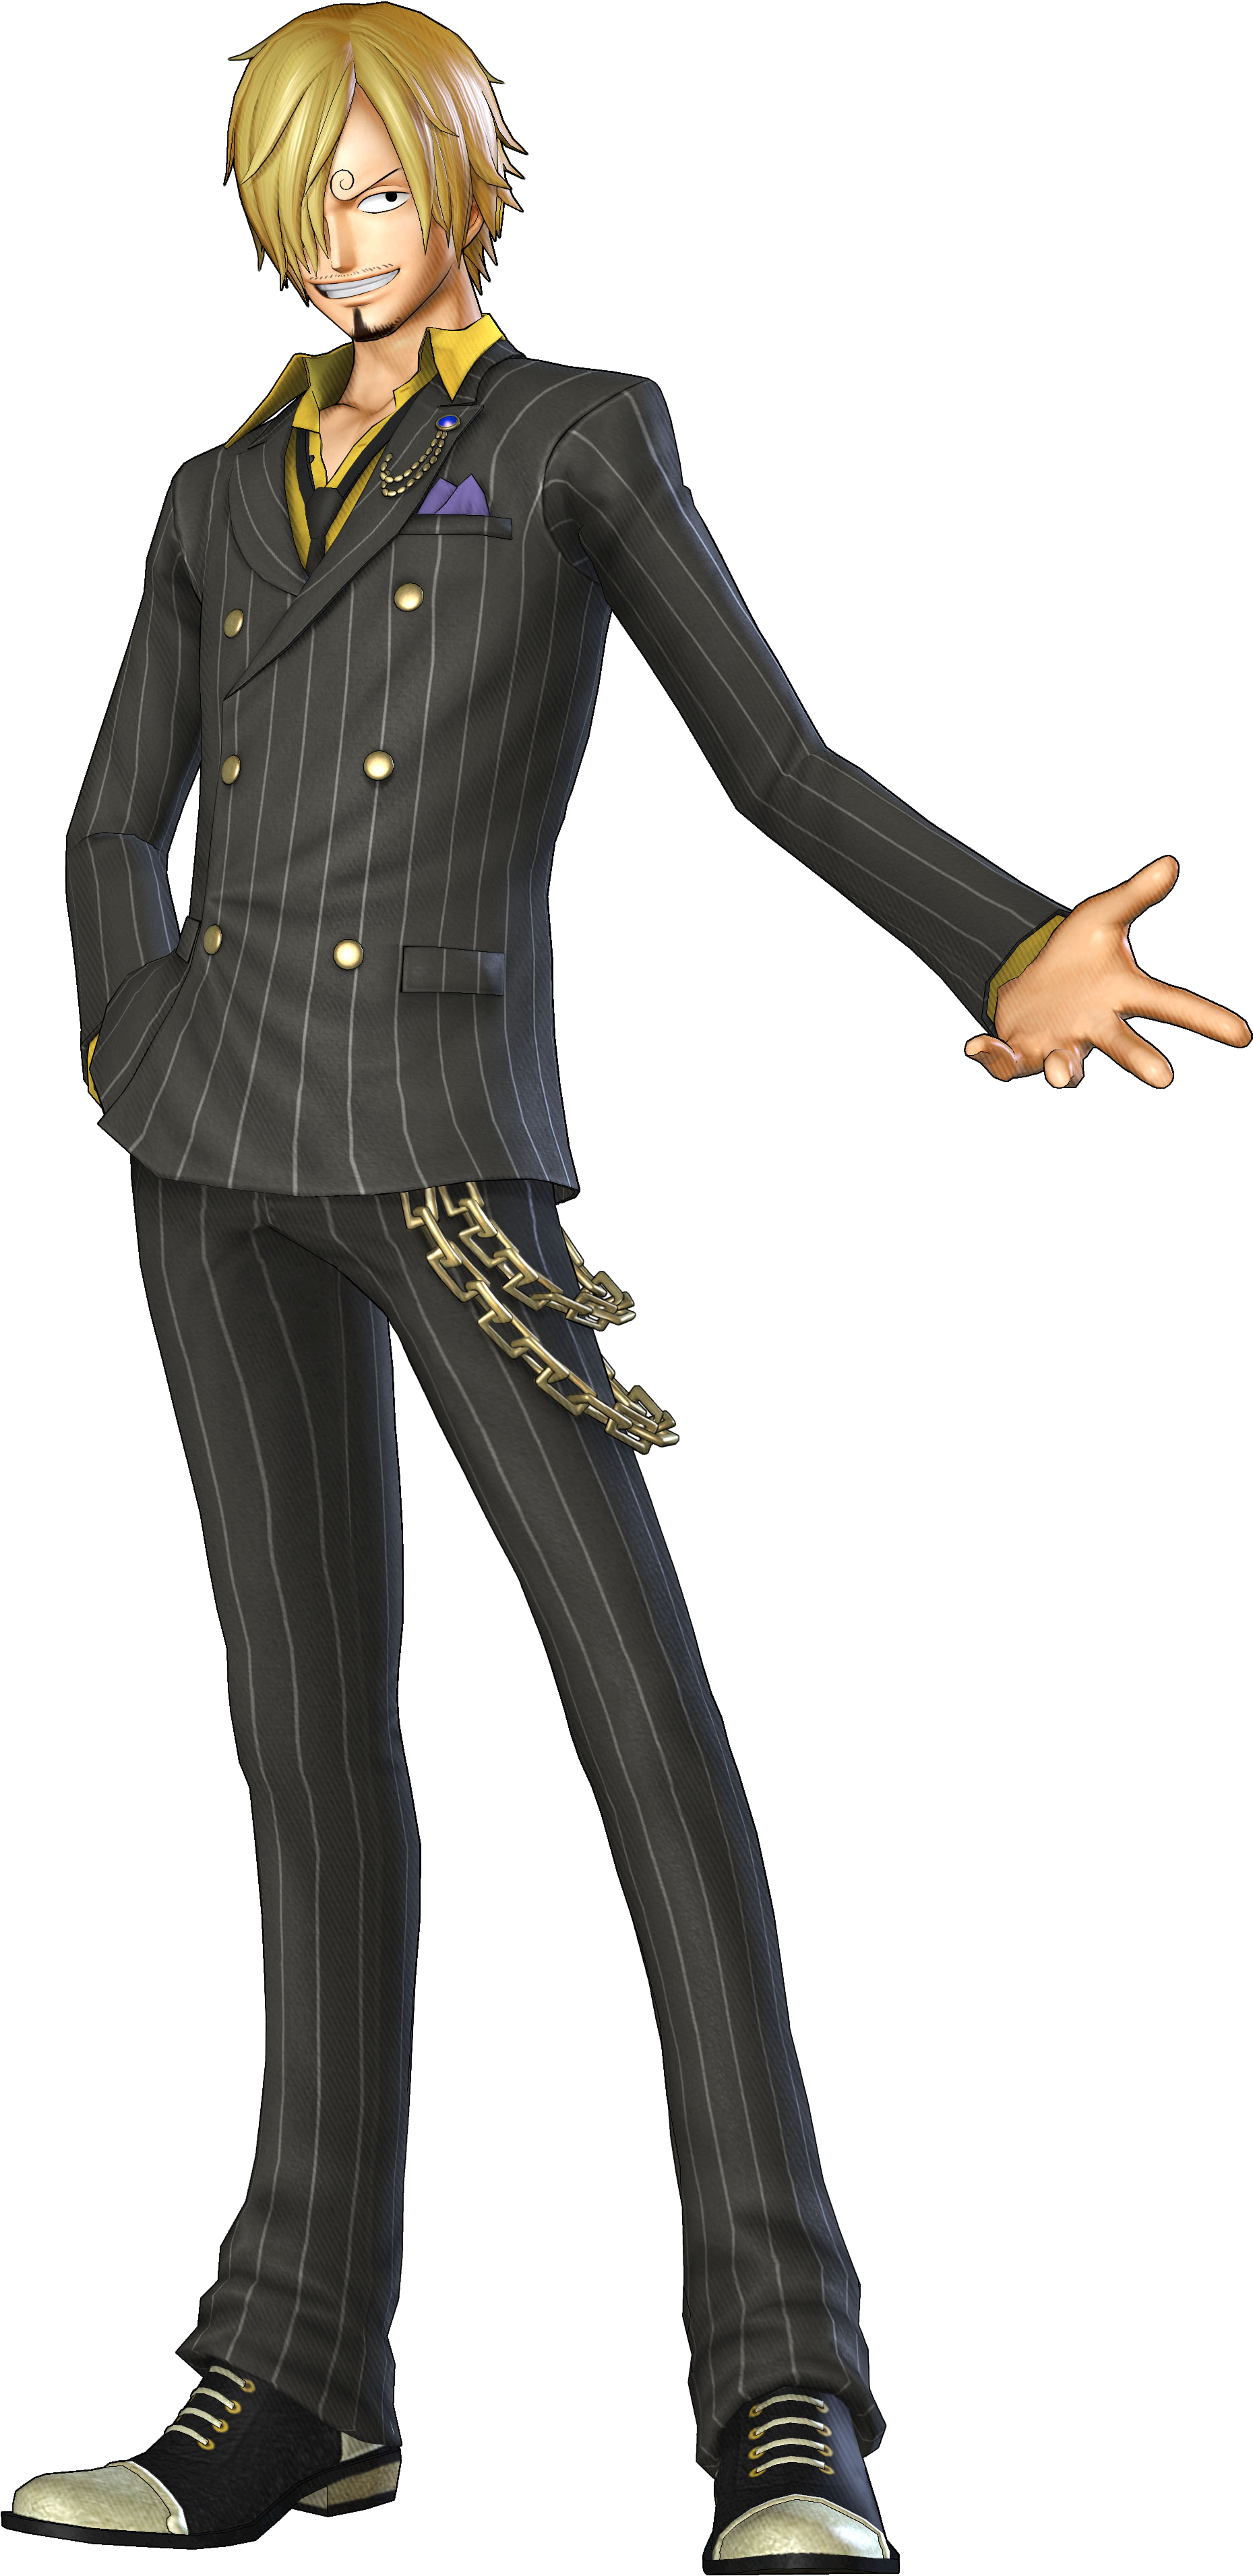 A Cartoon Character Wearing A Suit